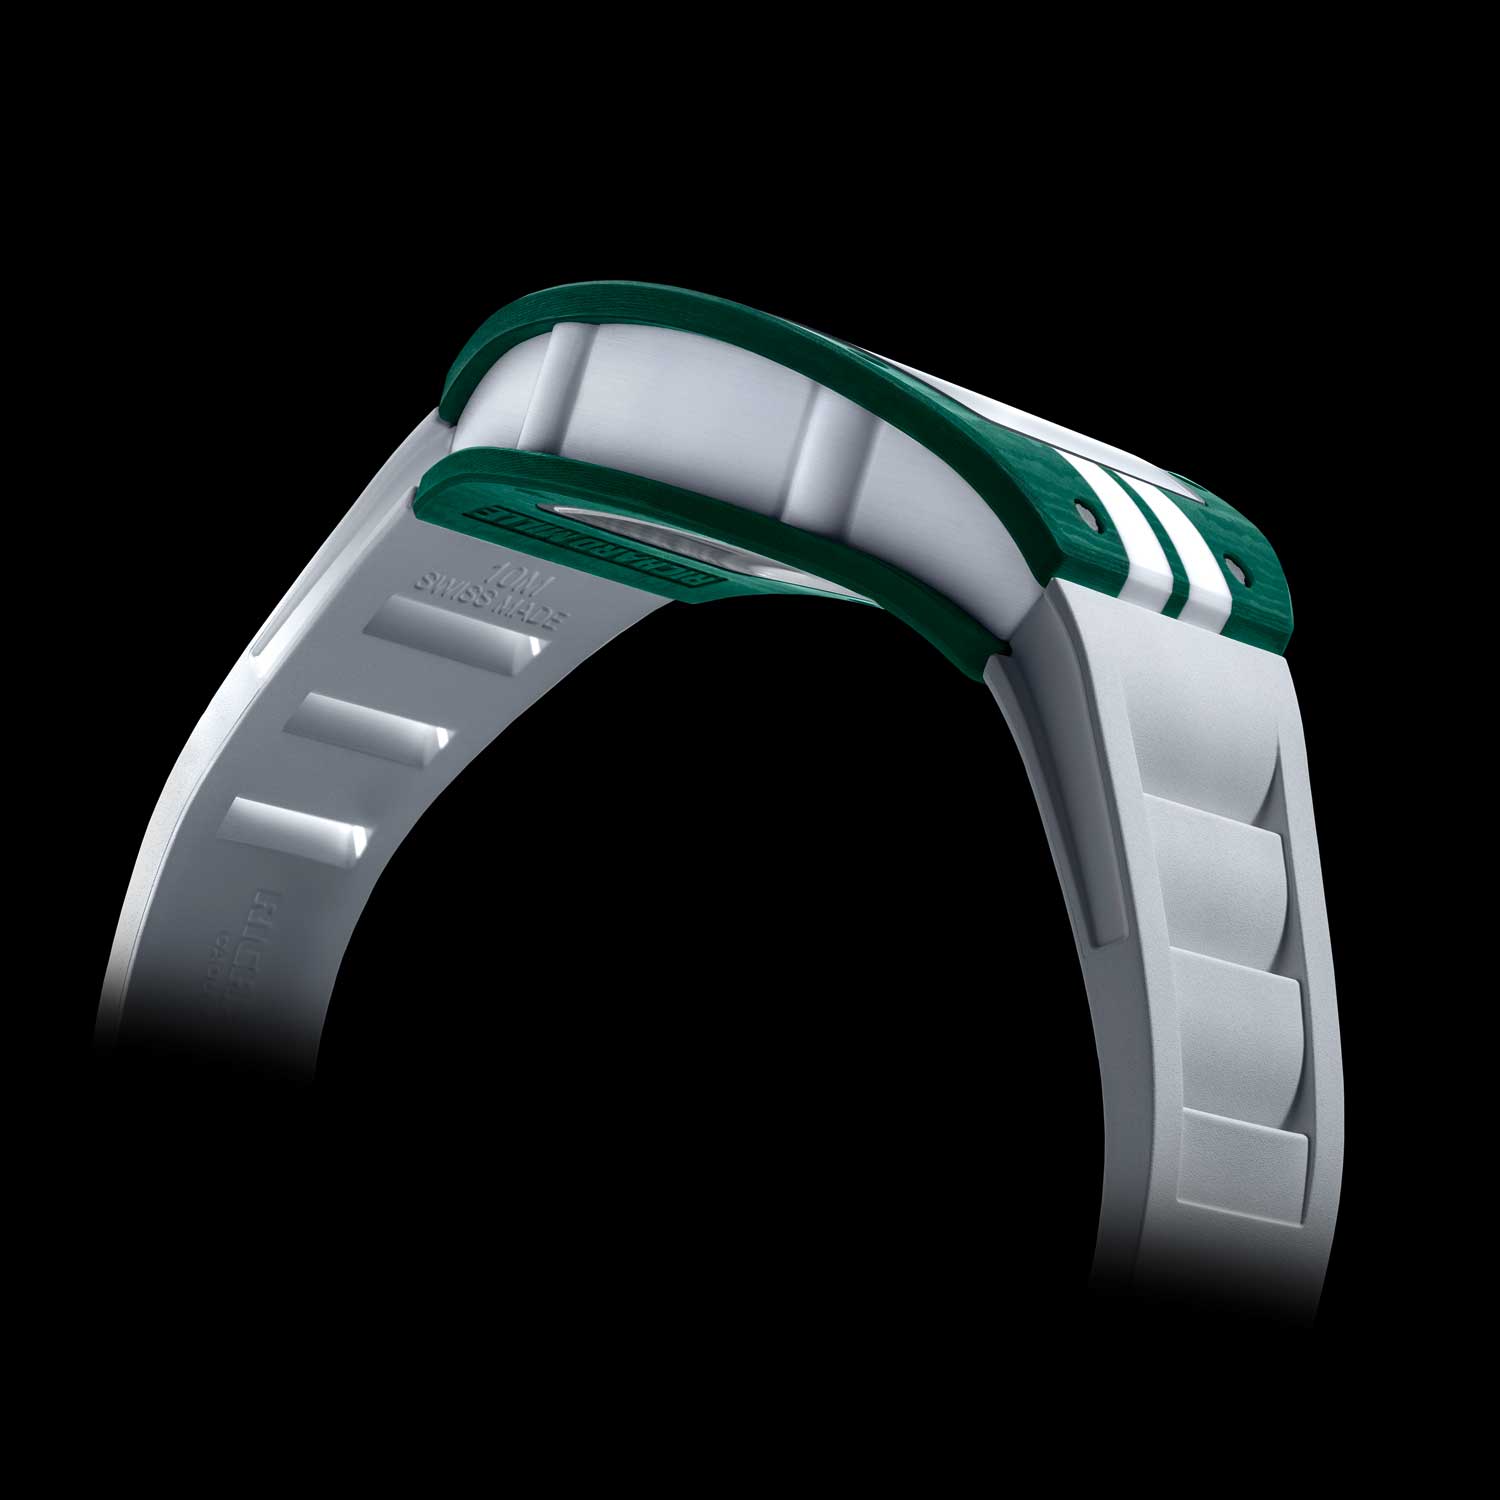 The RM 029 has a caseband milled from a solid block of white Quartz TPT®, offset by front and back bezels in green Quartz TPT®